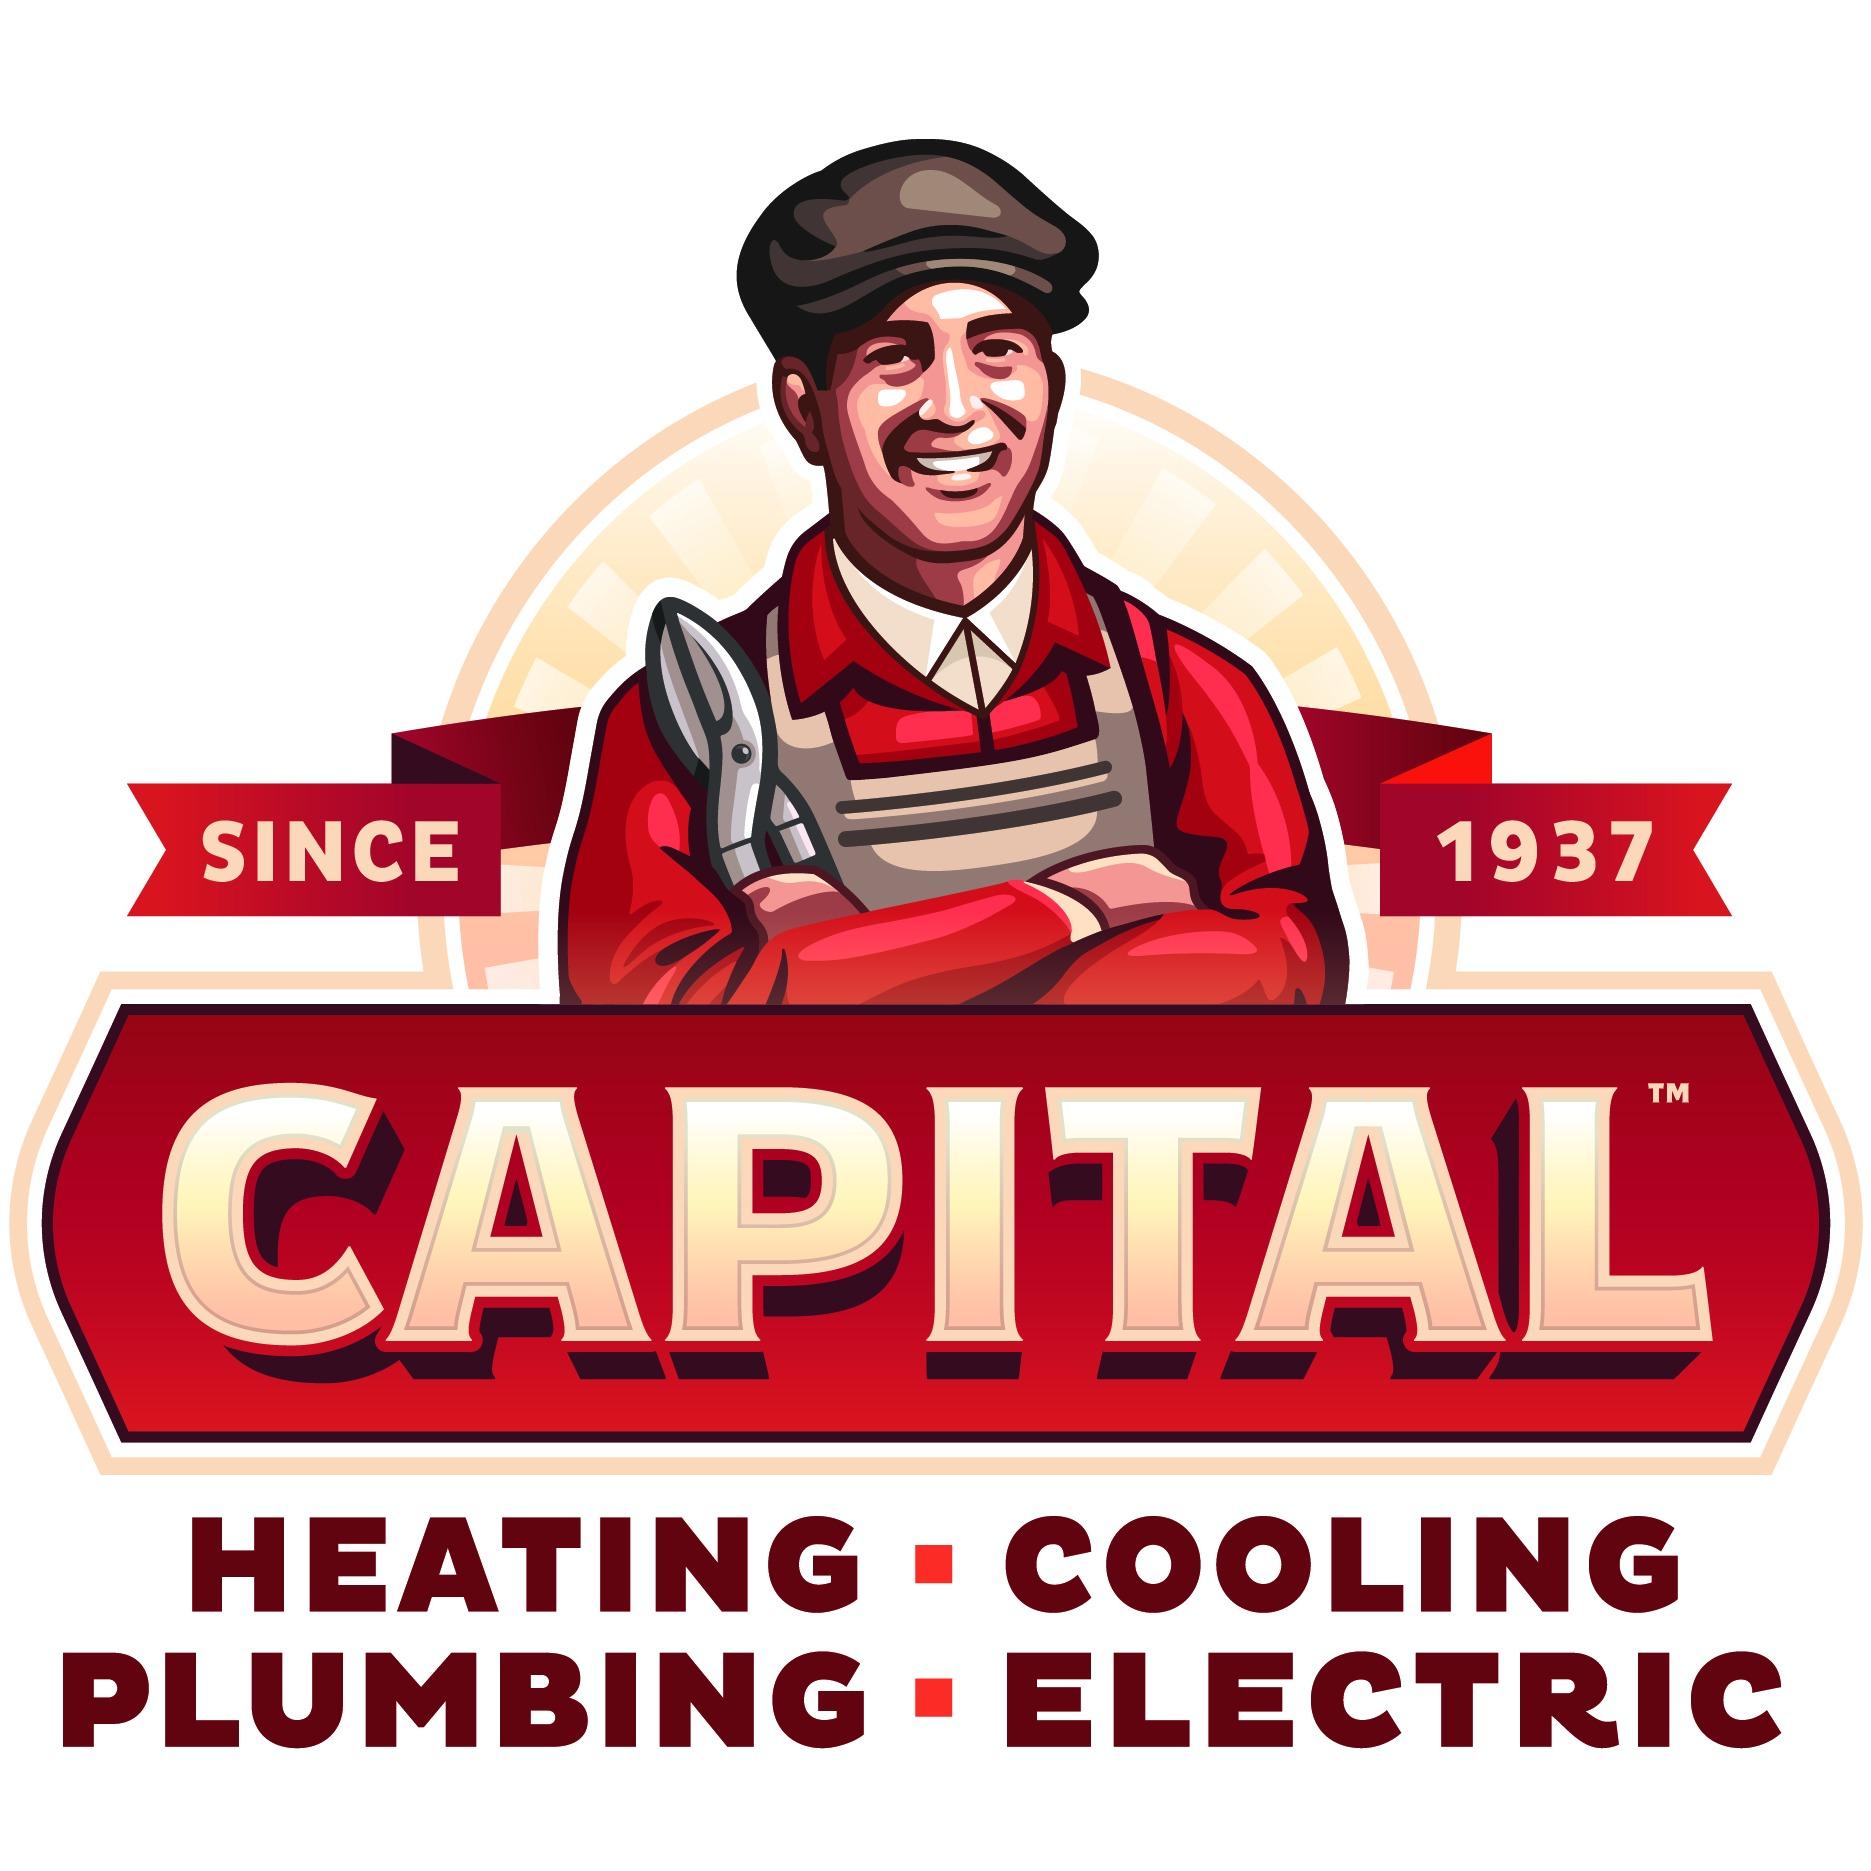 Capital Heating, Cooling, Plumbing & Electric - Lacey, WA 98503 - (360)491-7450 | ShowMeLocal.com